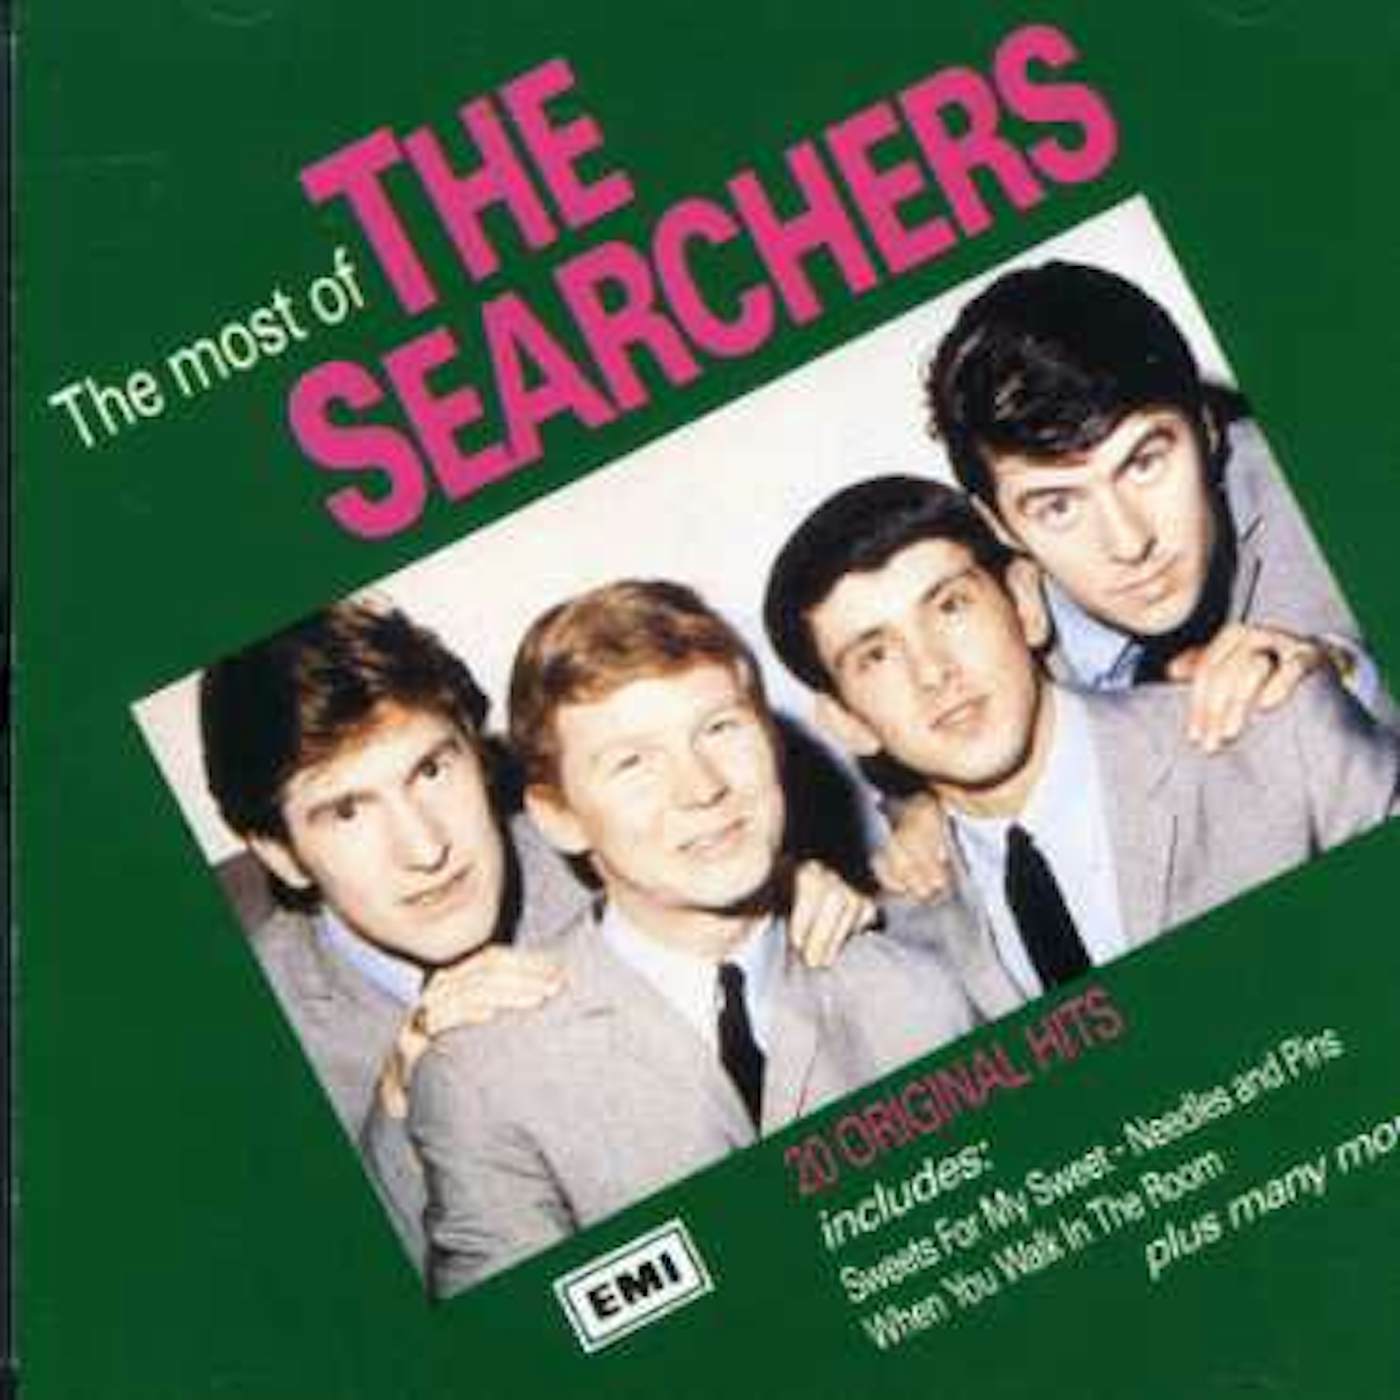 MOST OF THE SEARCHERS CD